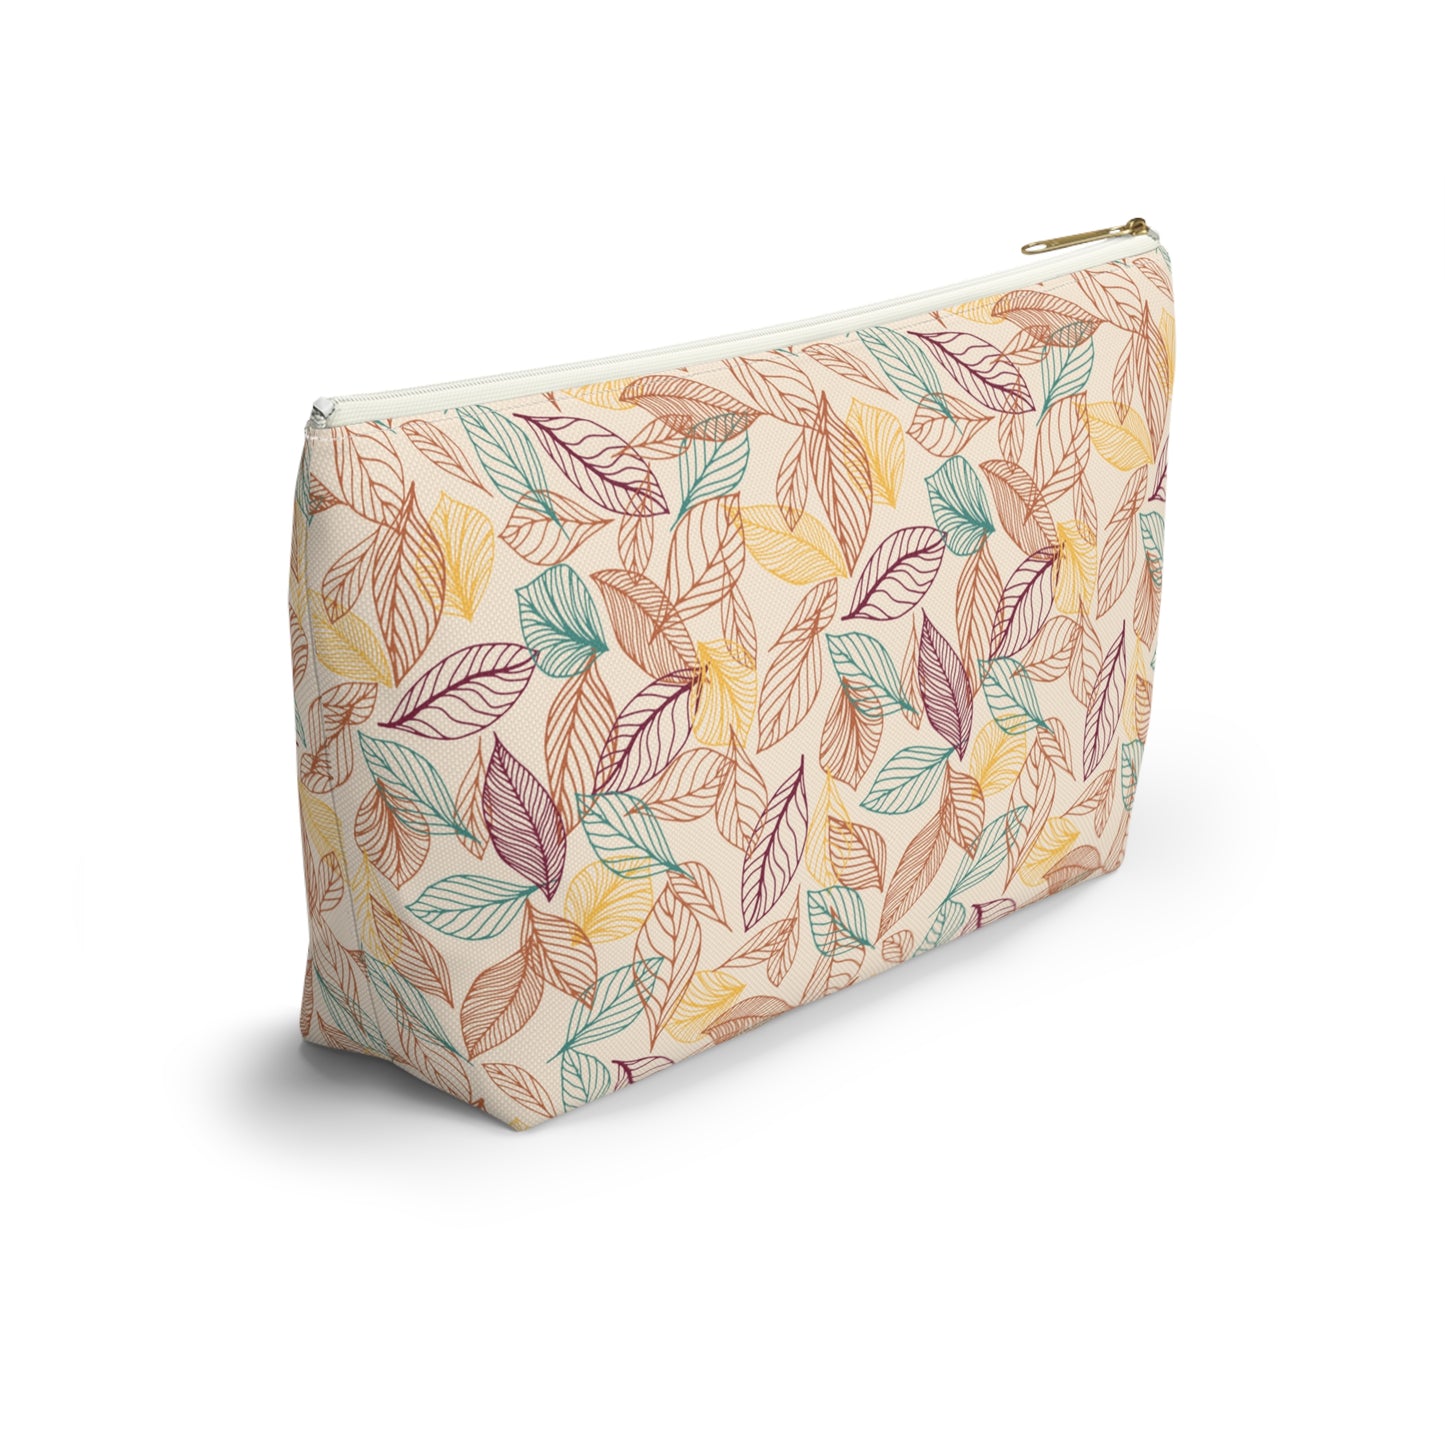 Accessory Pouch in Fall Leaf Lines Pattern